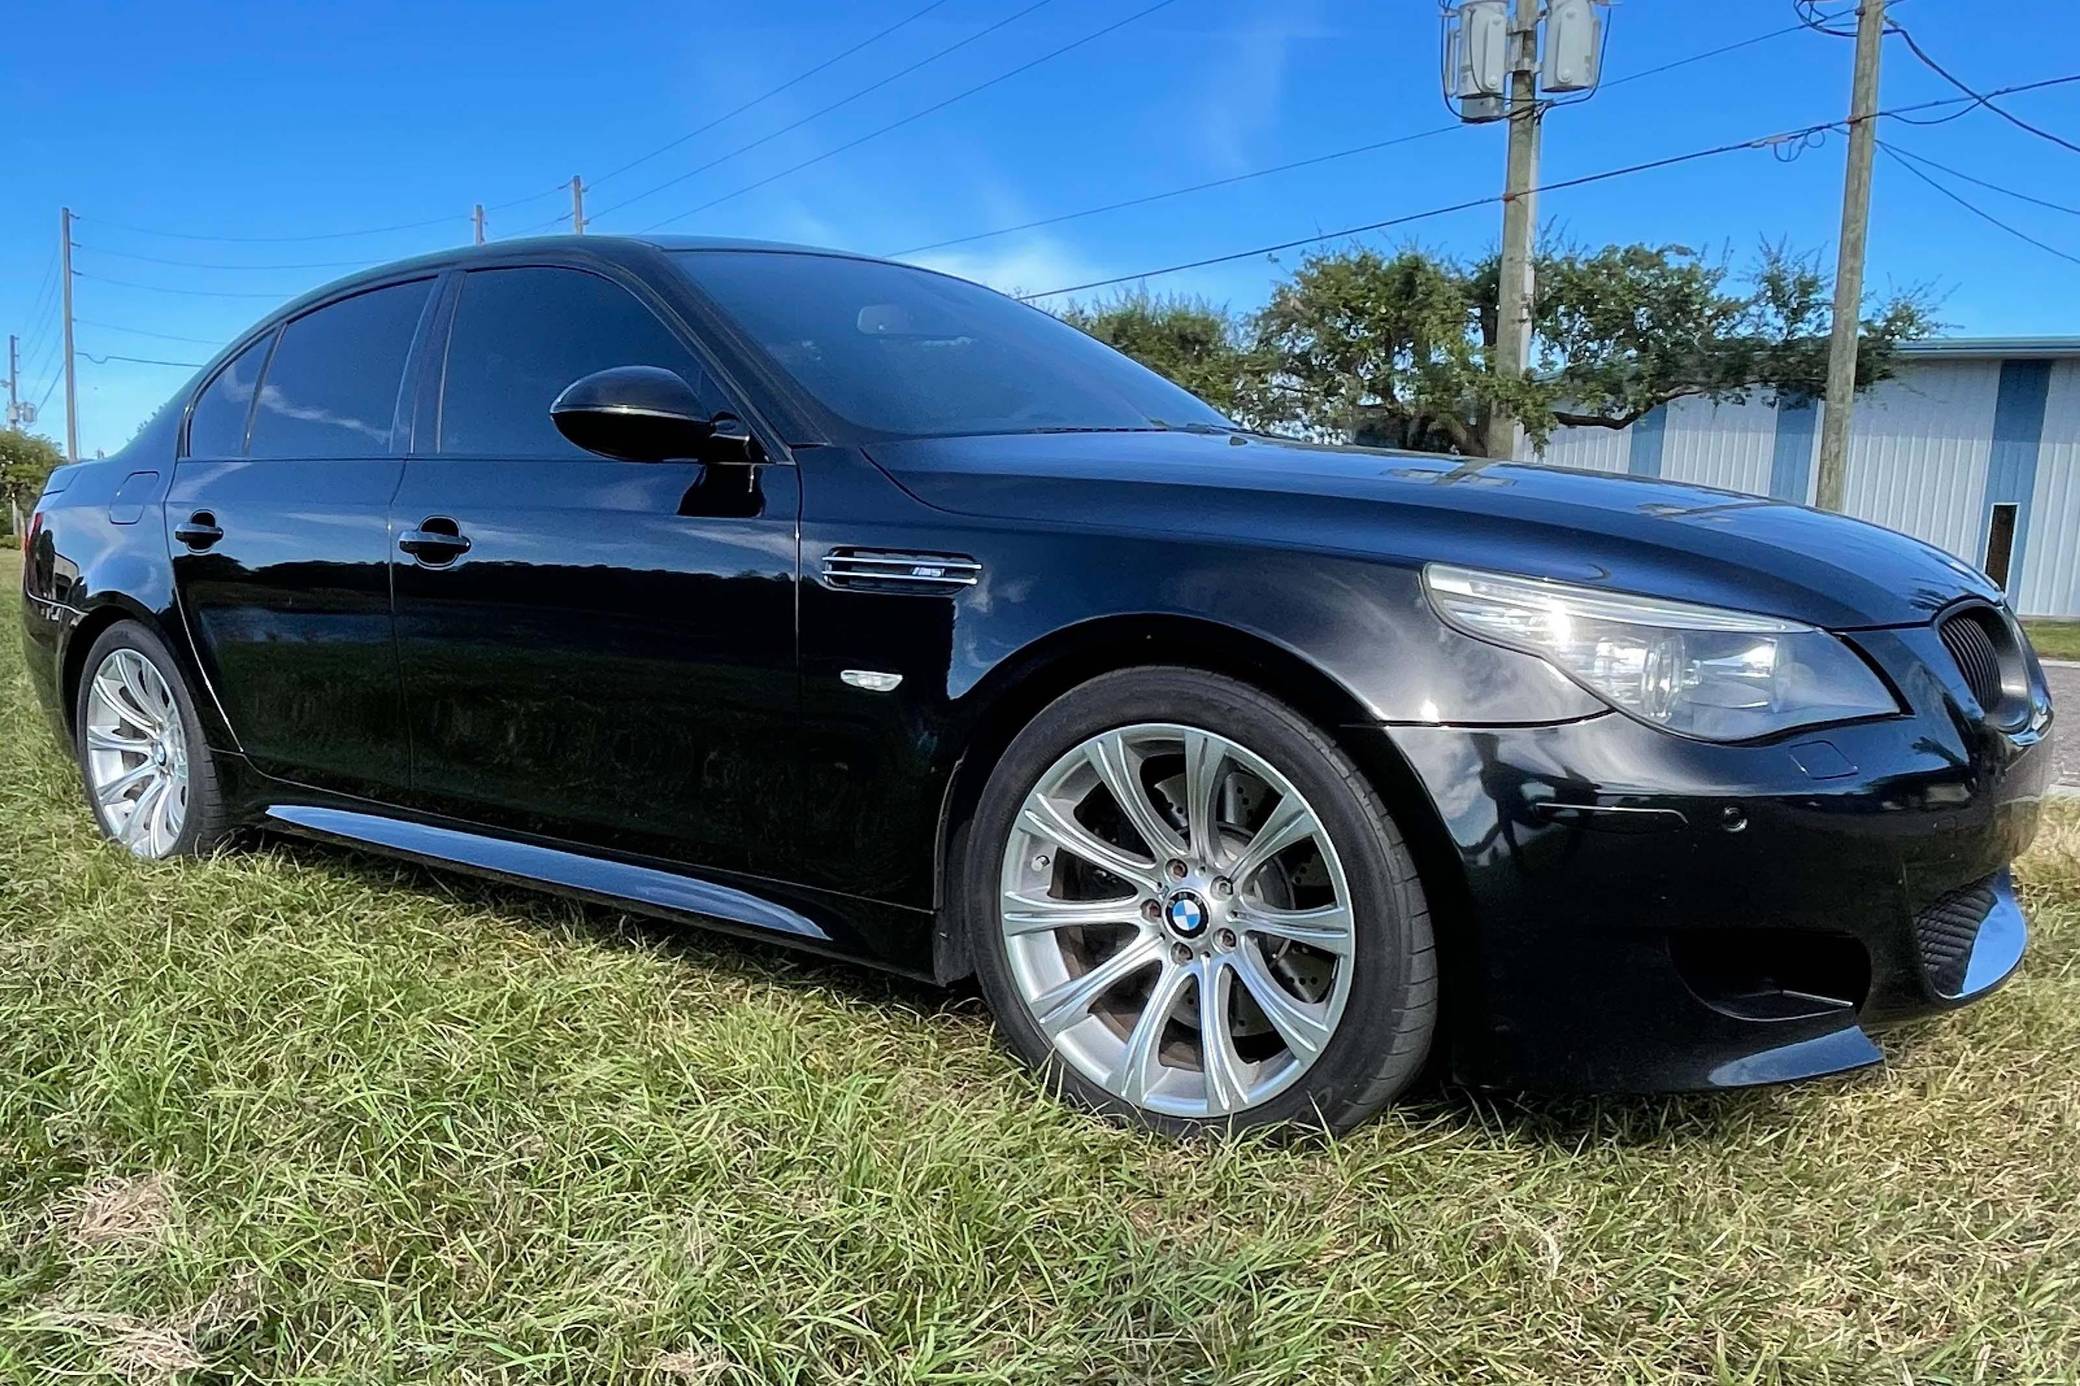 Find BMW M5 v10 for sale - AutoScout24